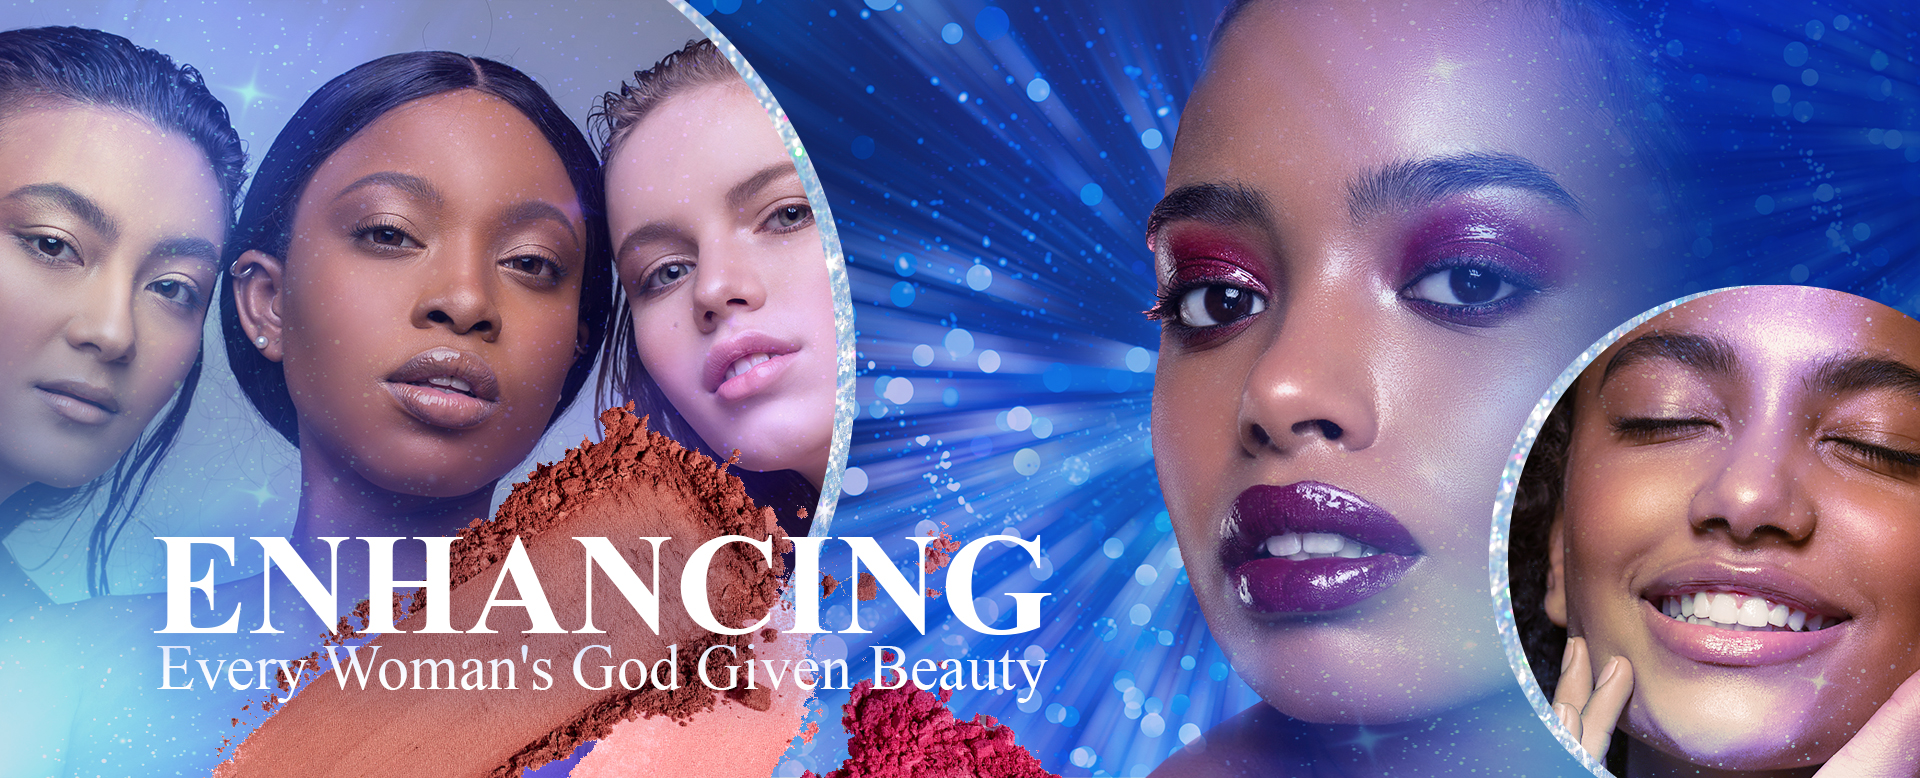 ENHANCING Every Woman's God Given Beauty